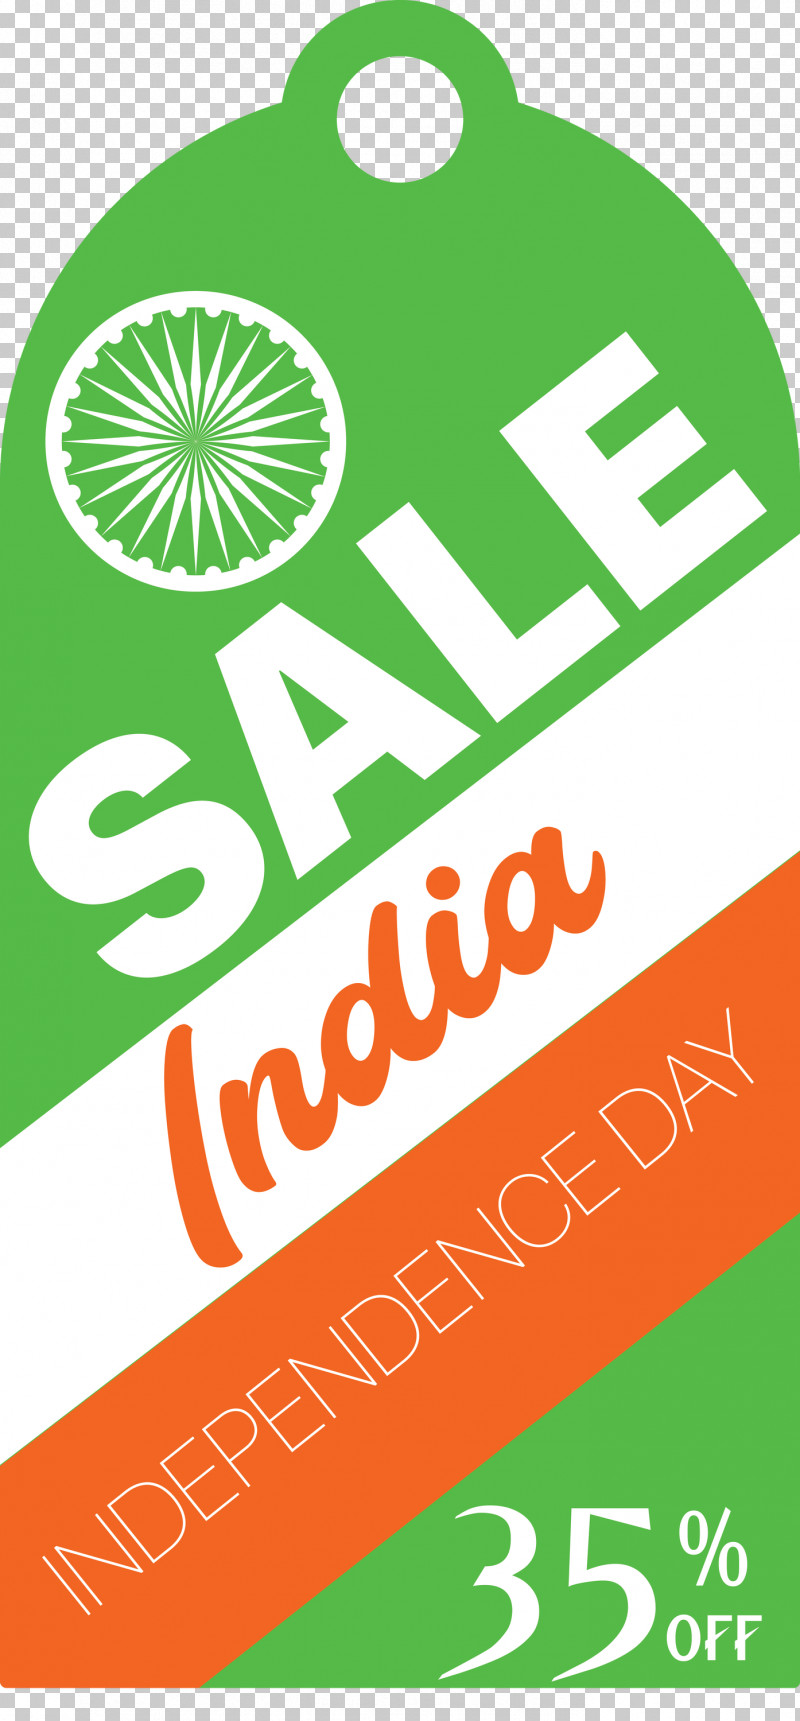 India Indenpendence Day Sale Tag India Indenpendence Day Sale Label PNG, Clipart, Area, Green, India Indenpendence Day Sale Label, India Indenpendence Day Sale Tag, Jai Bhim Free PNG Download